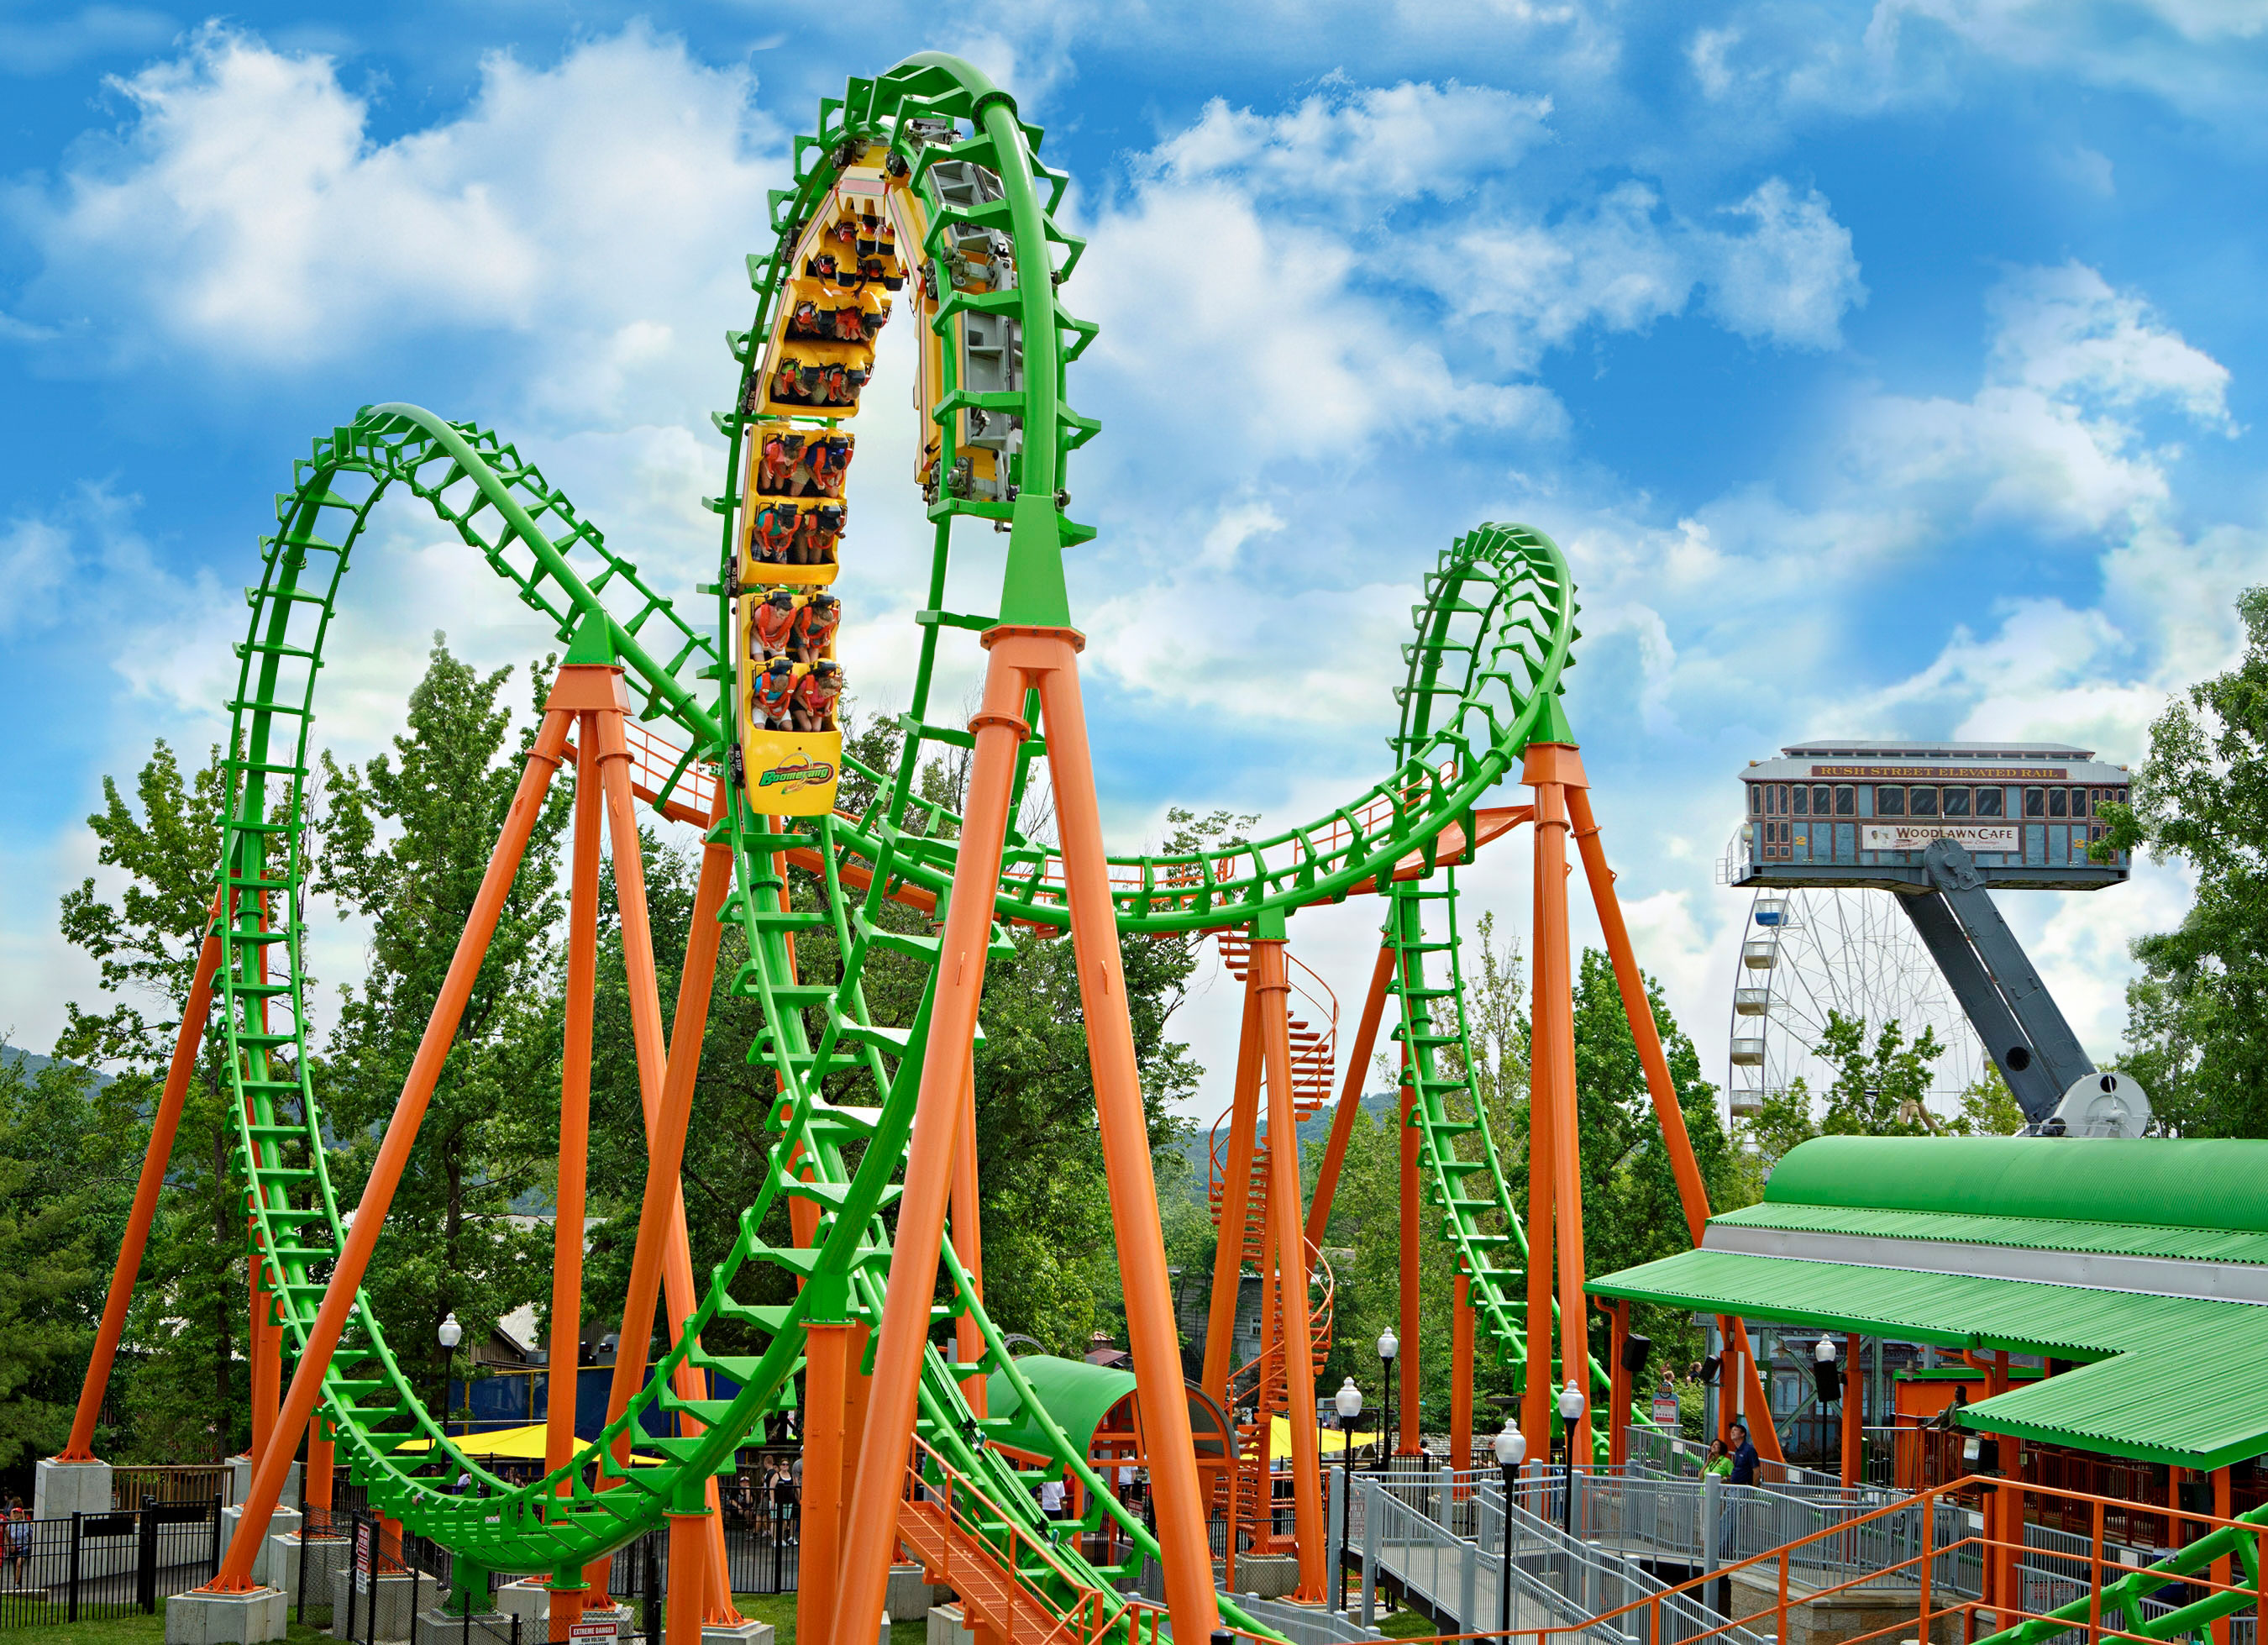 Theme Park Review • Six Flags St. Louis (SFStL) Discussion Thread - Page 162